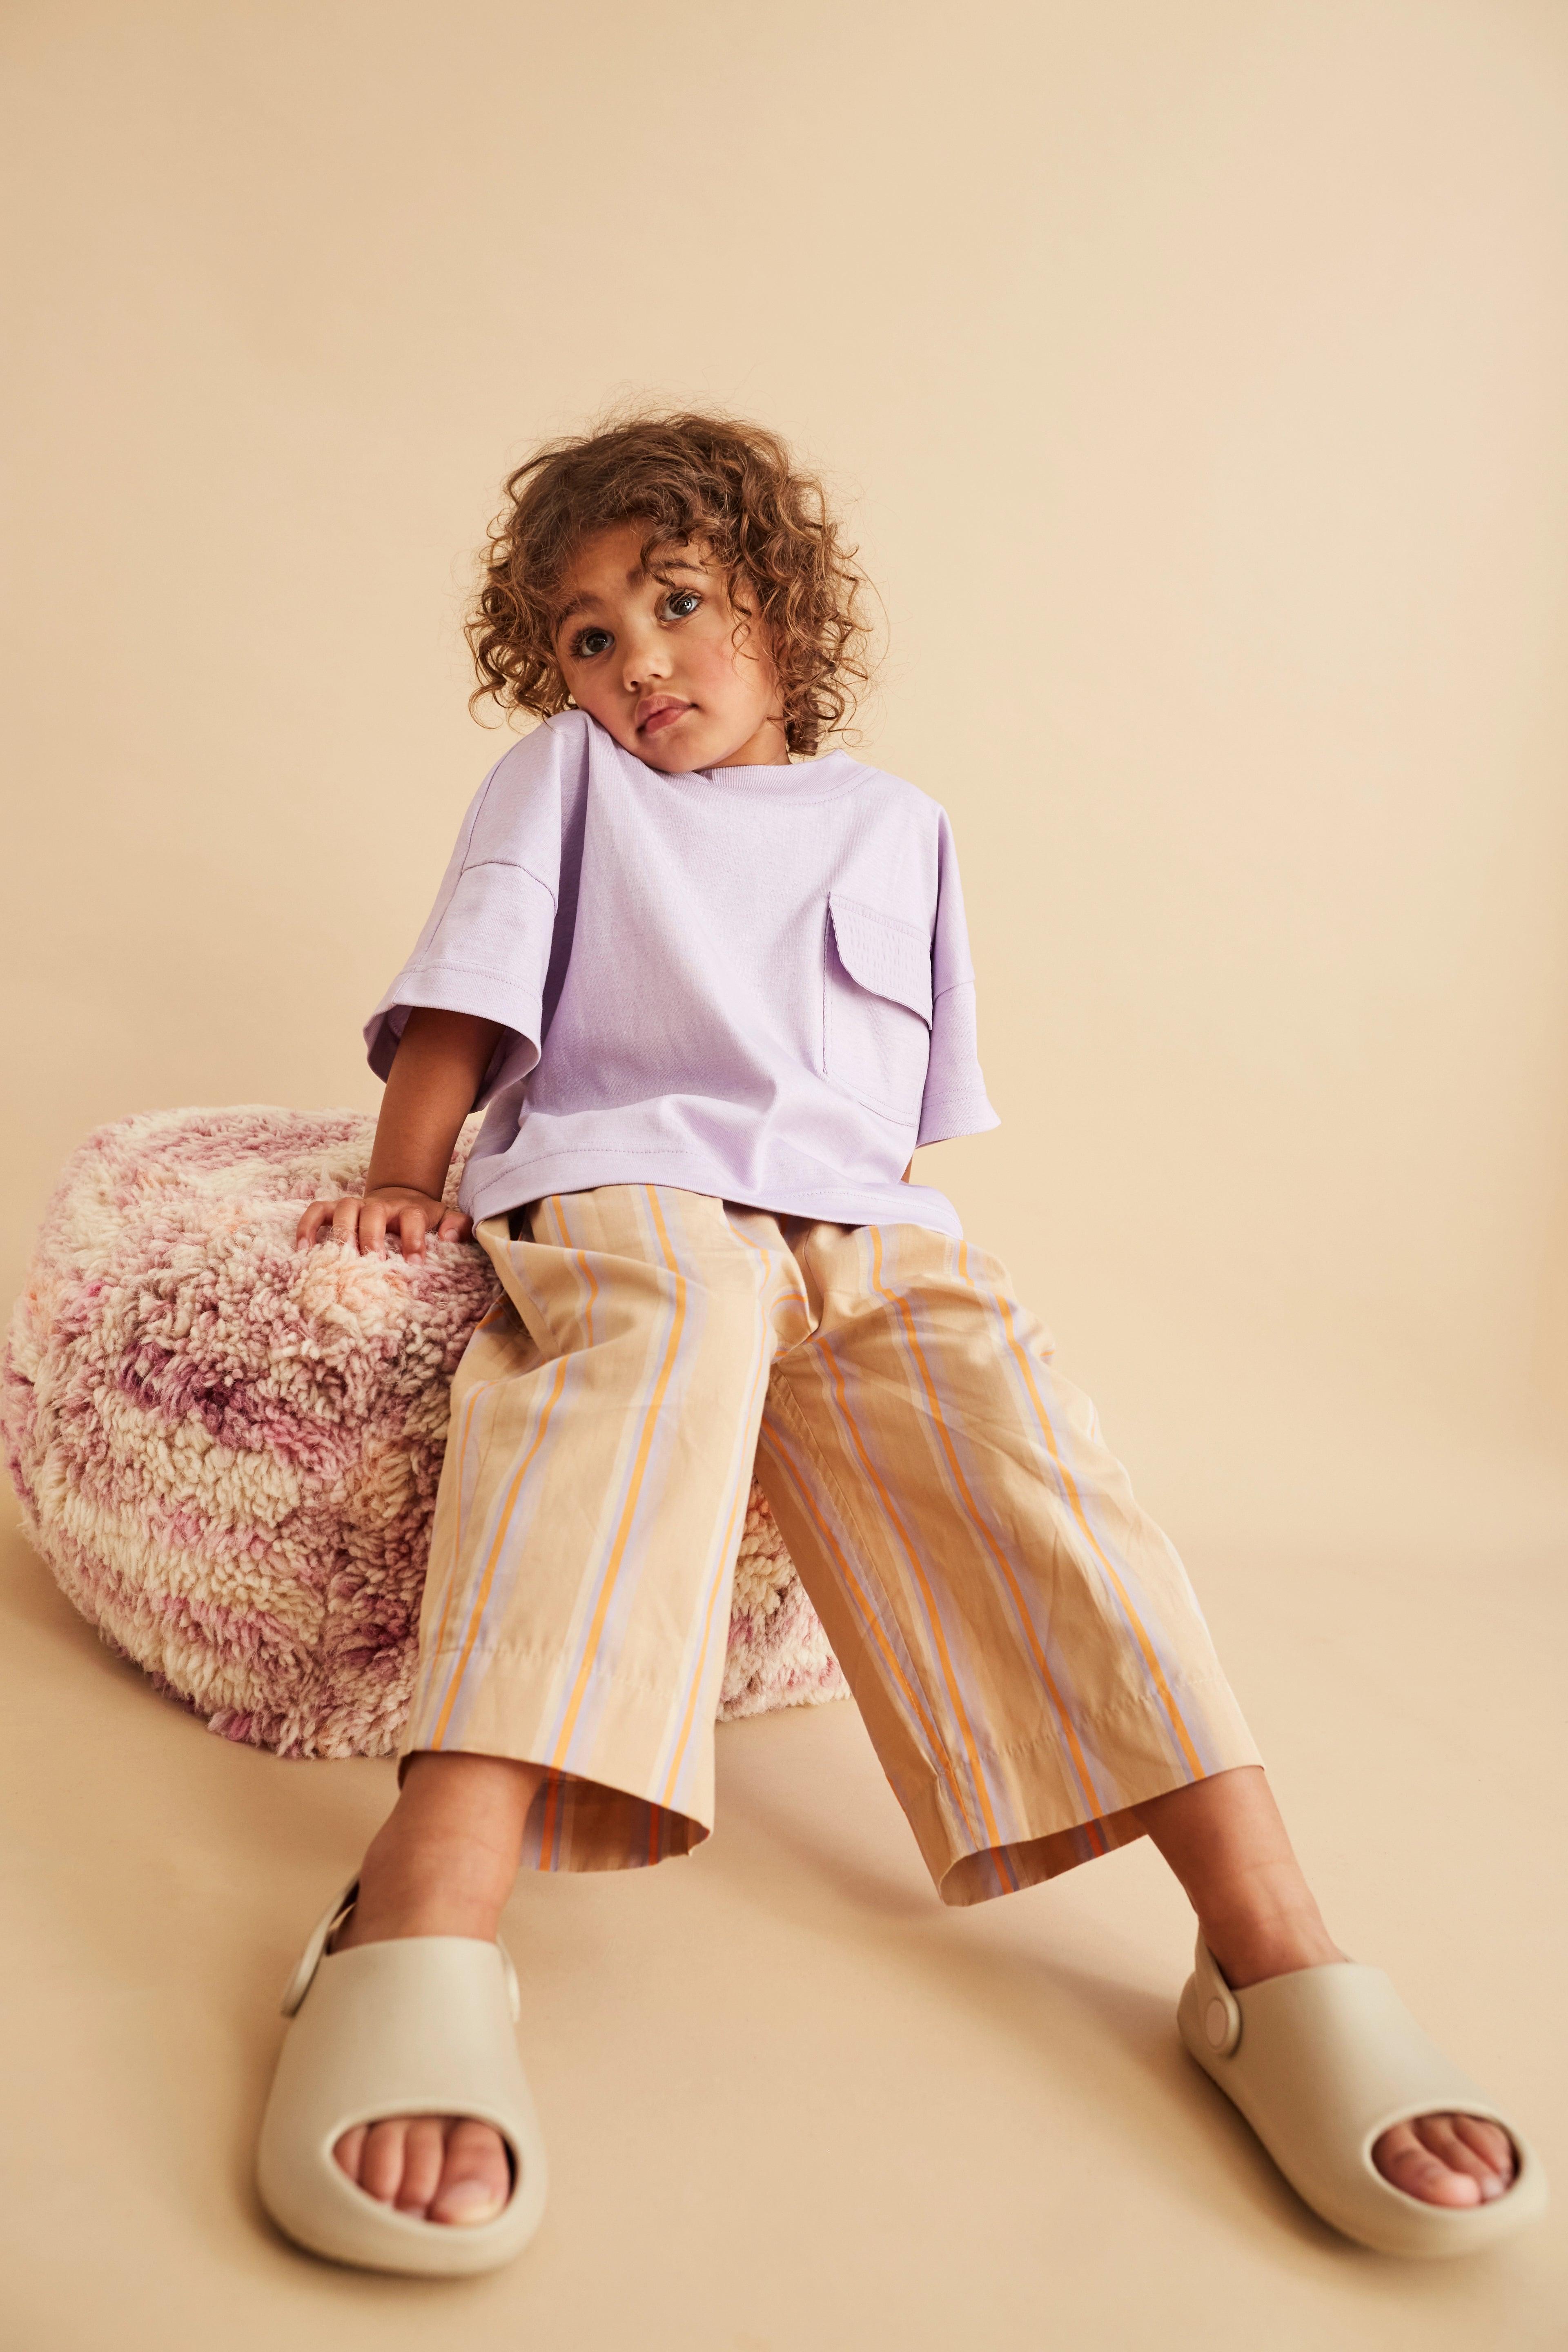 Modern and comfy straight leg striped trousers with elasticated waistband and slanted side pockets, patch pocket in the back. Made from a soft, washed organic cotton, beige base with lilac and orange yarn-dyed stripe. Matching woven t-shirt and romper available for the perfect kids wedding outfit or holiday look. 100% organic cotton Studio Koter is a UK based unisex kidswear and toddler clothing brand. All garments are produced in the UK and Portugal in a considered and sustainable way.